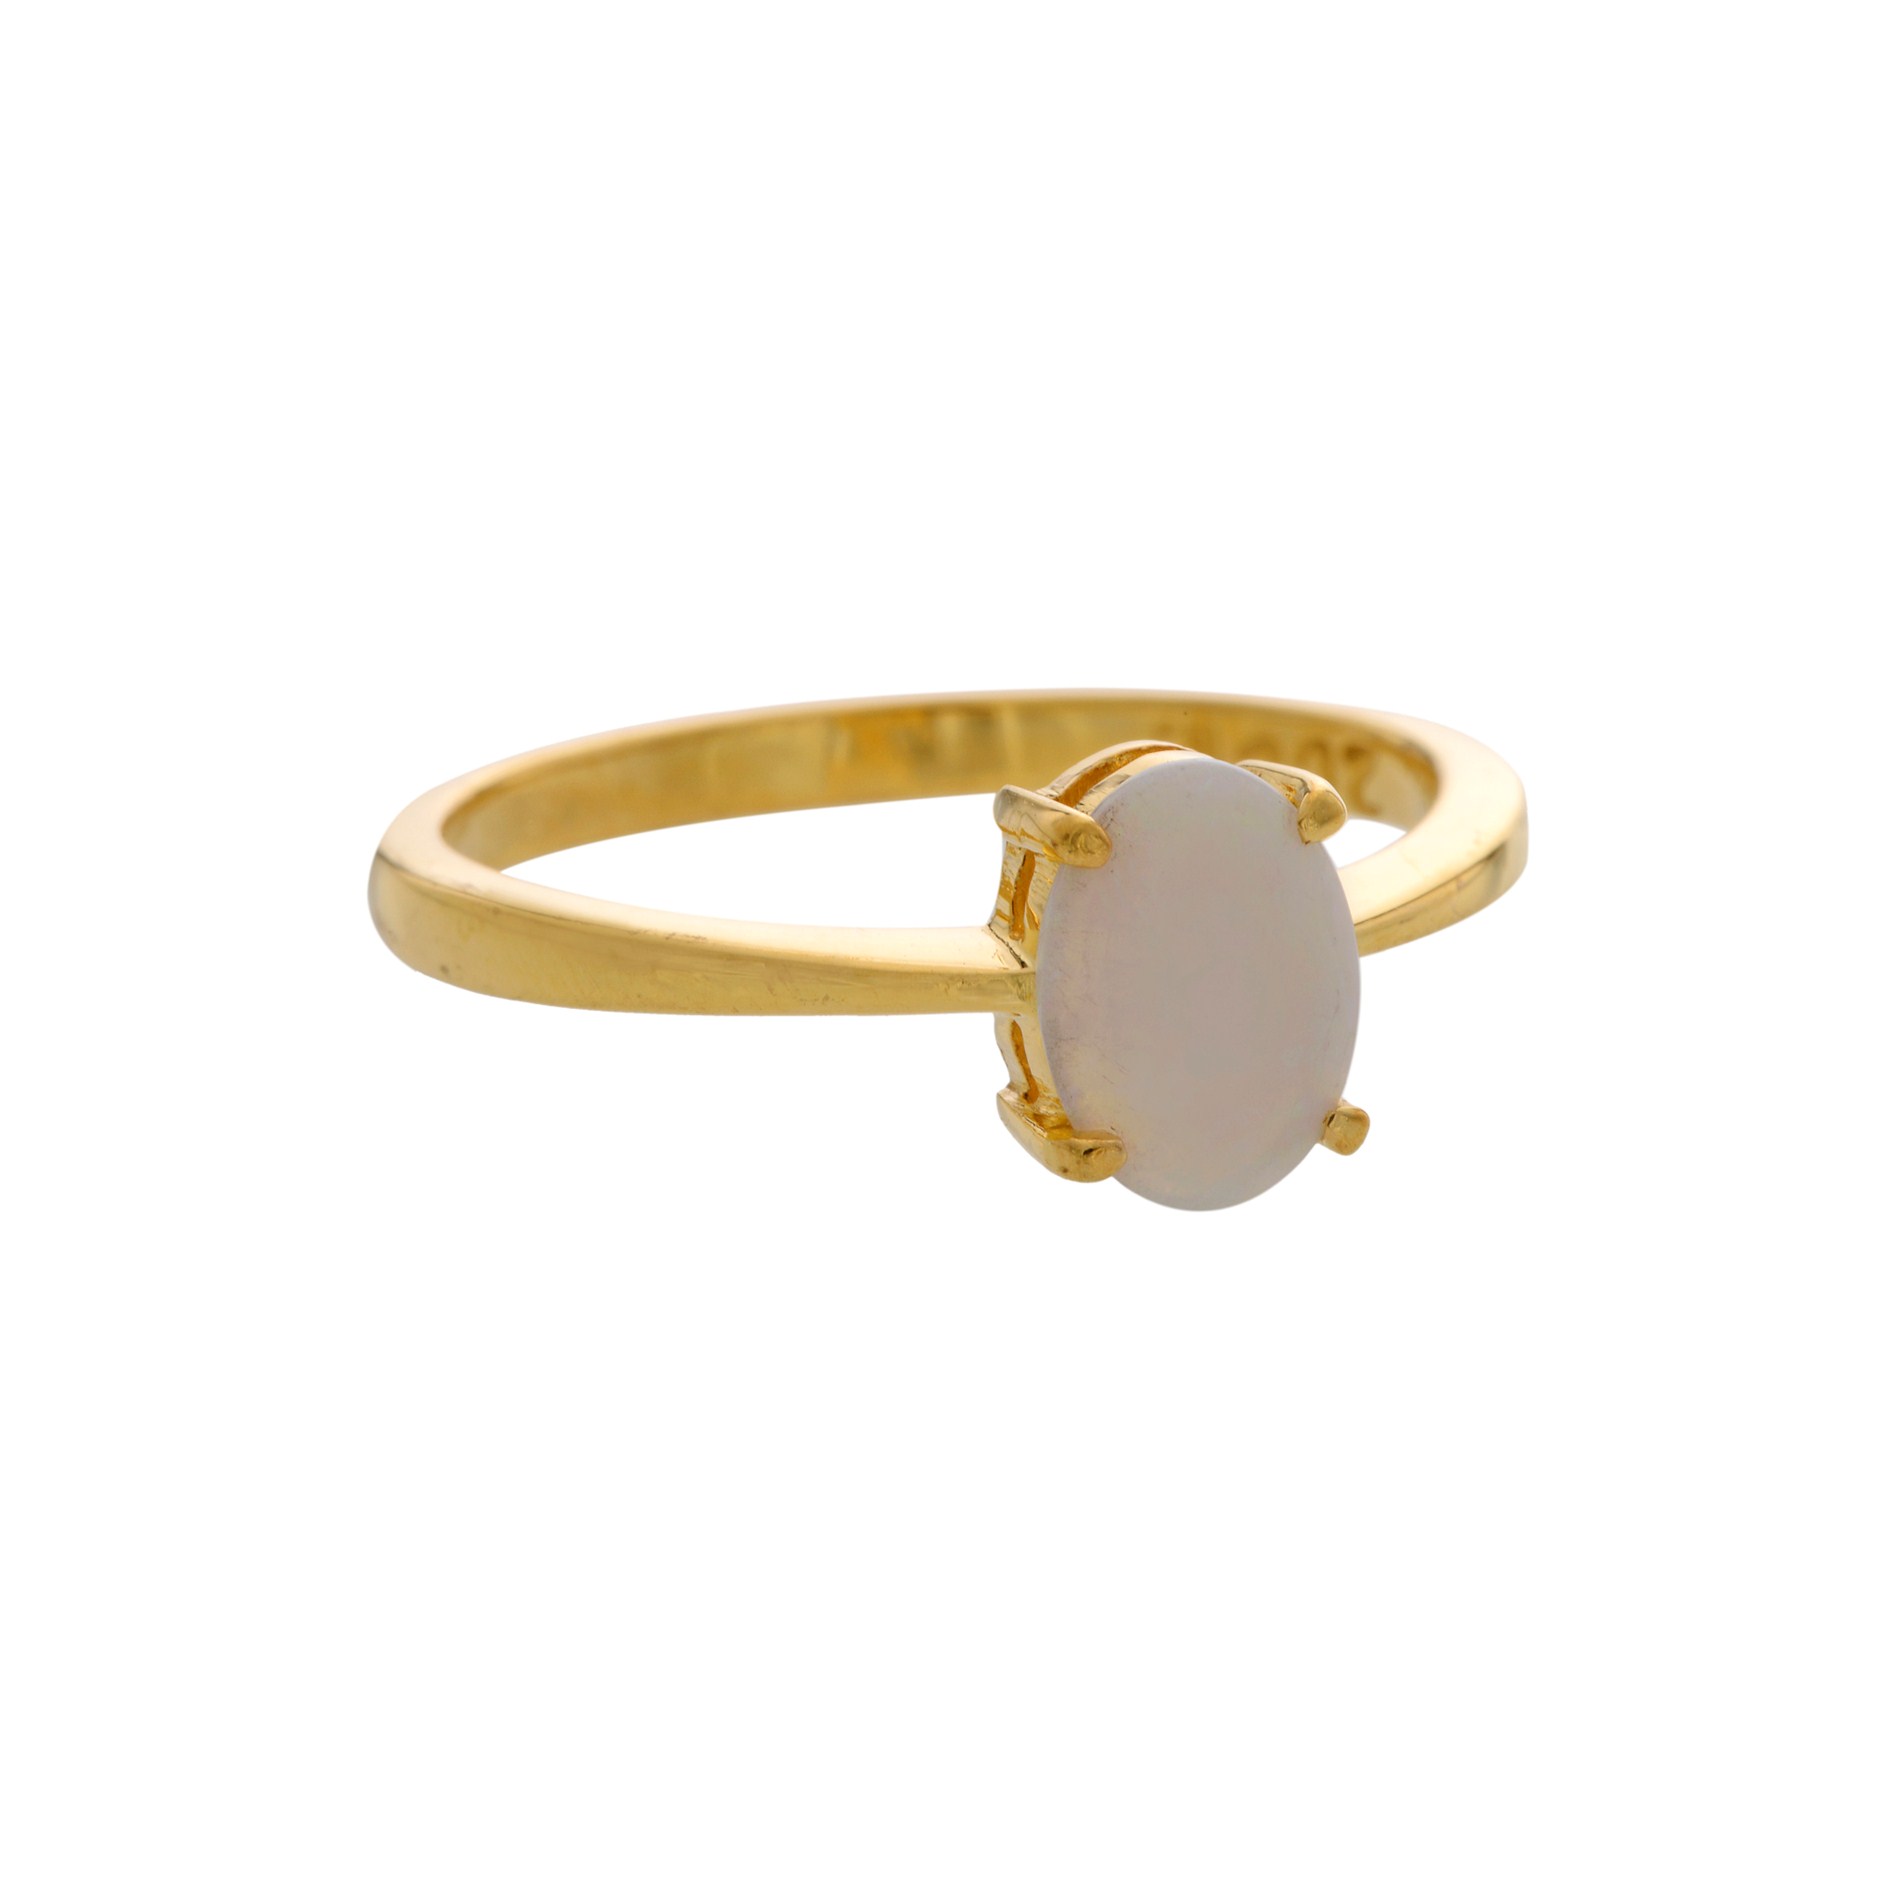 Golden Stone Ring. - The Merrythought